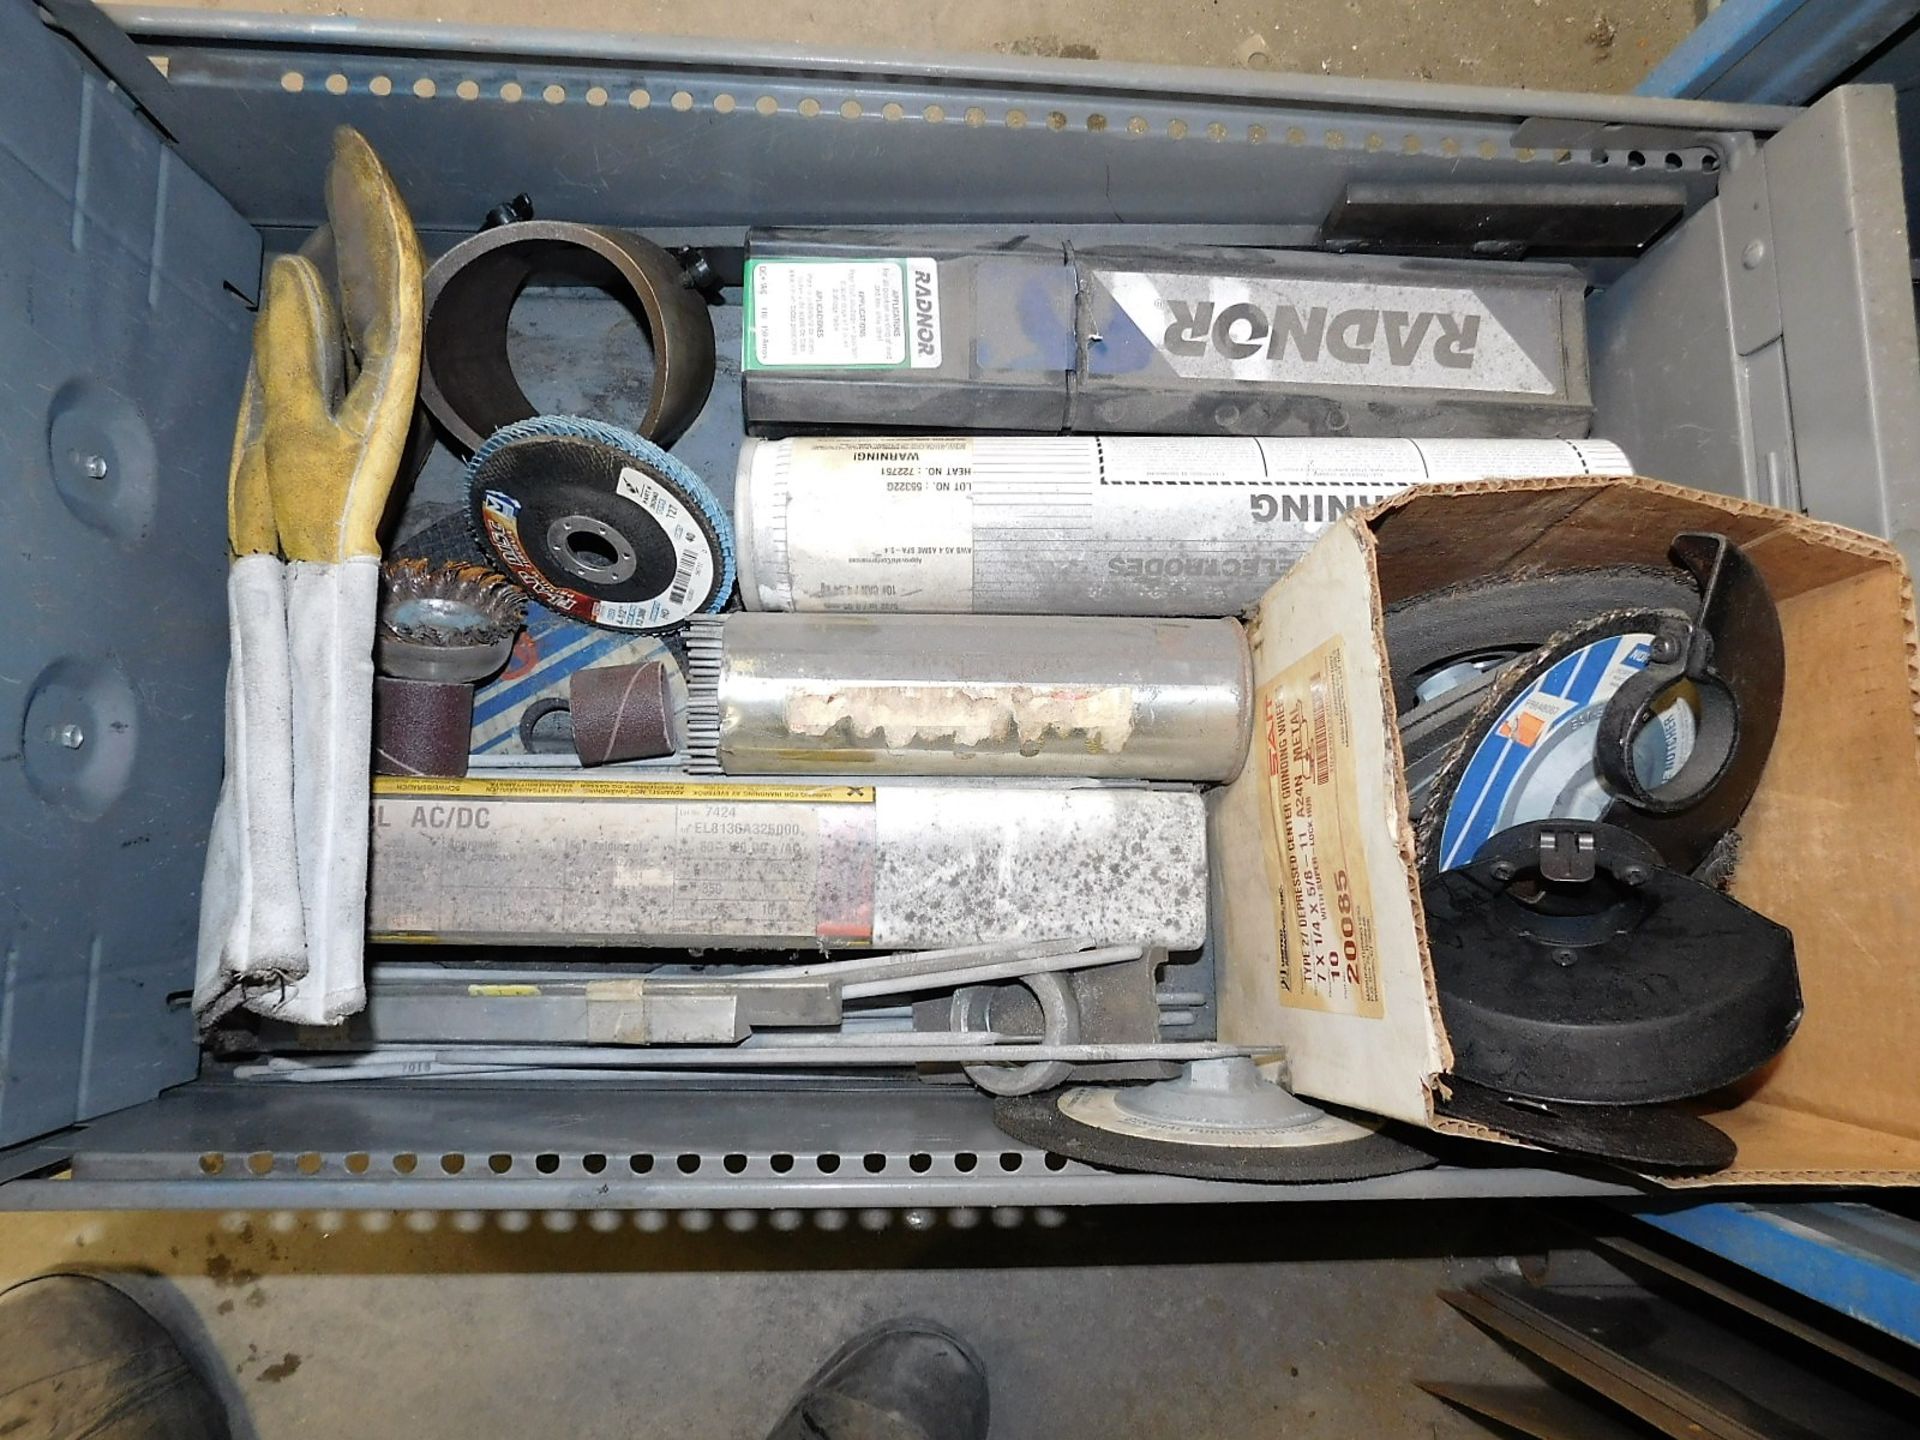 4-DRAWER FILE CABINET FILLED W/ GRINDING AND WELDING SUPPLIES - Image 2 of 5